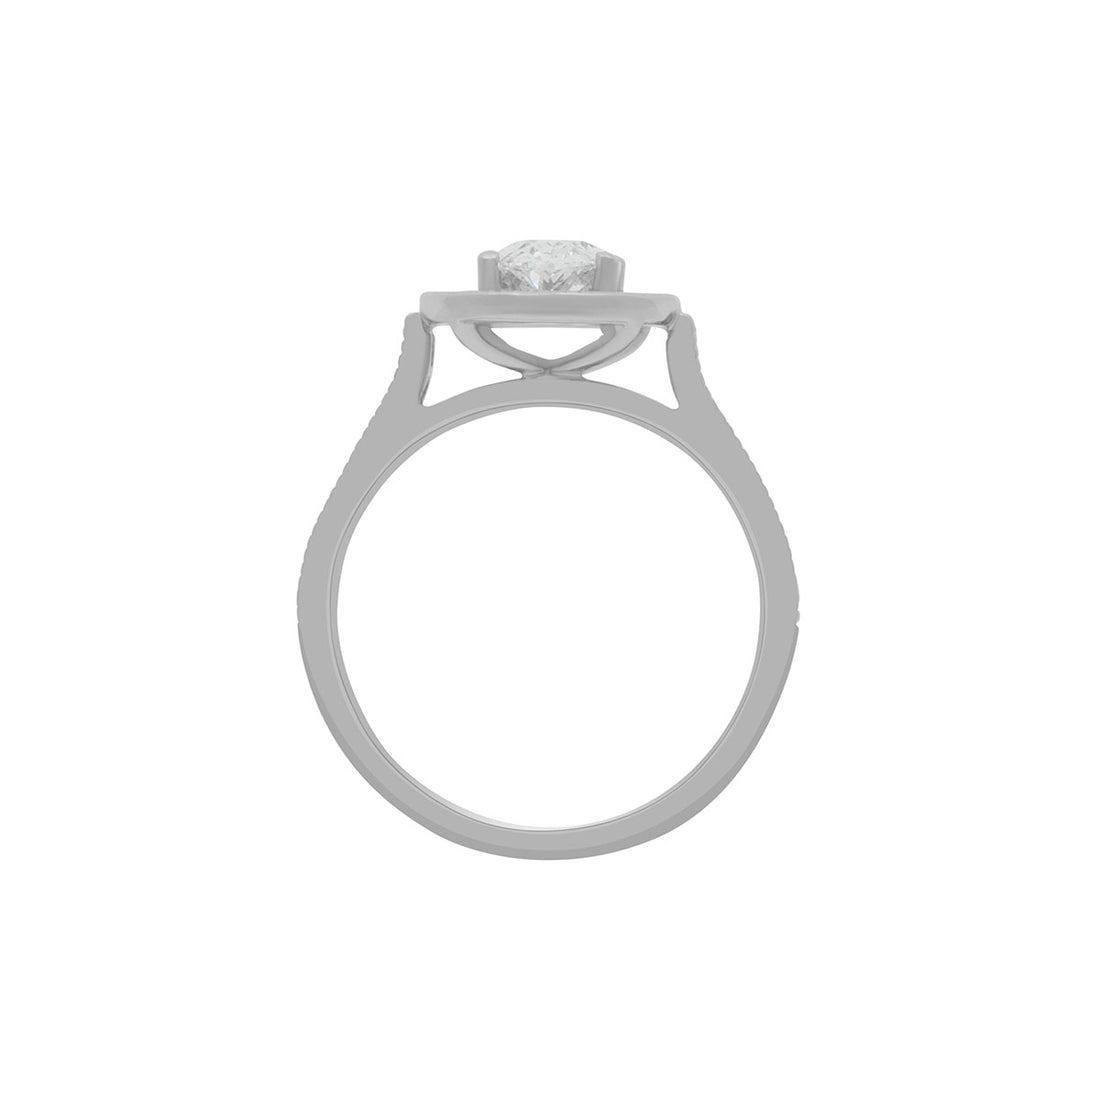 Antique Oval Engagement Ring IN WHITE GOLD AND UPRIGHT ANGLE